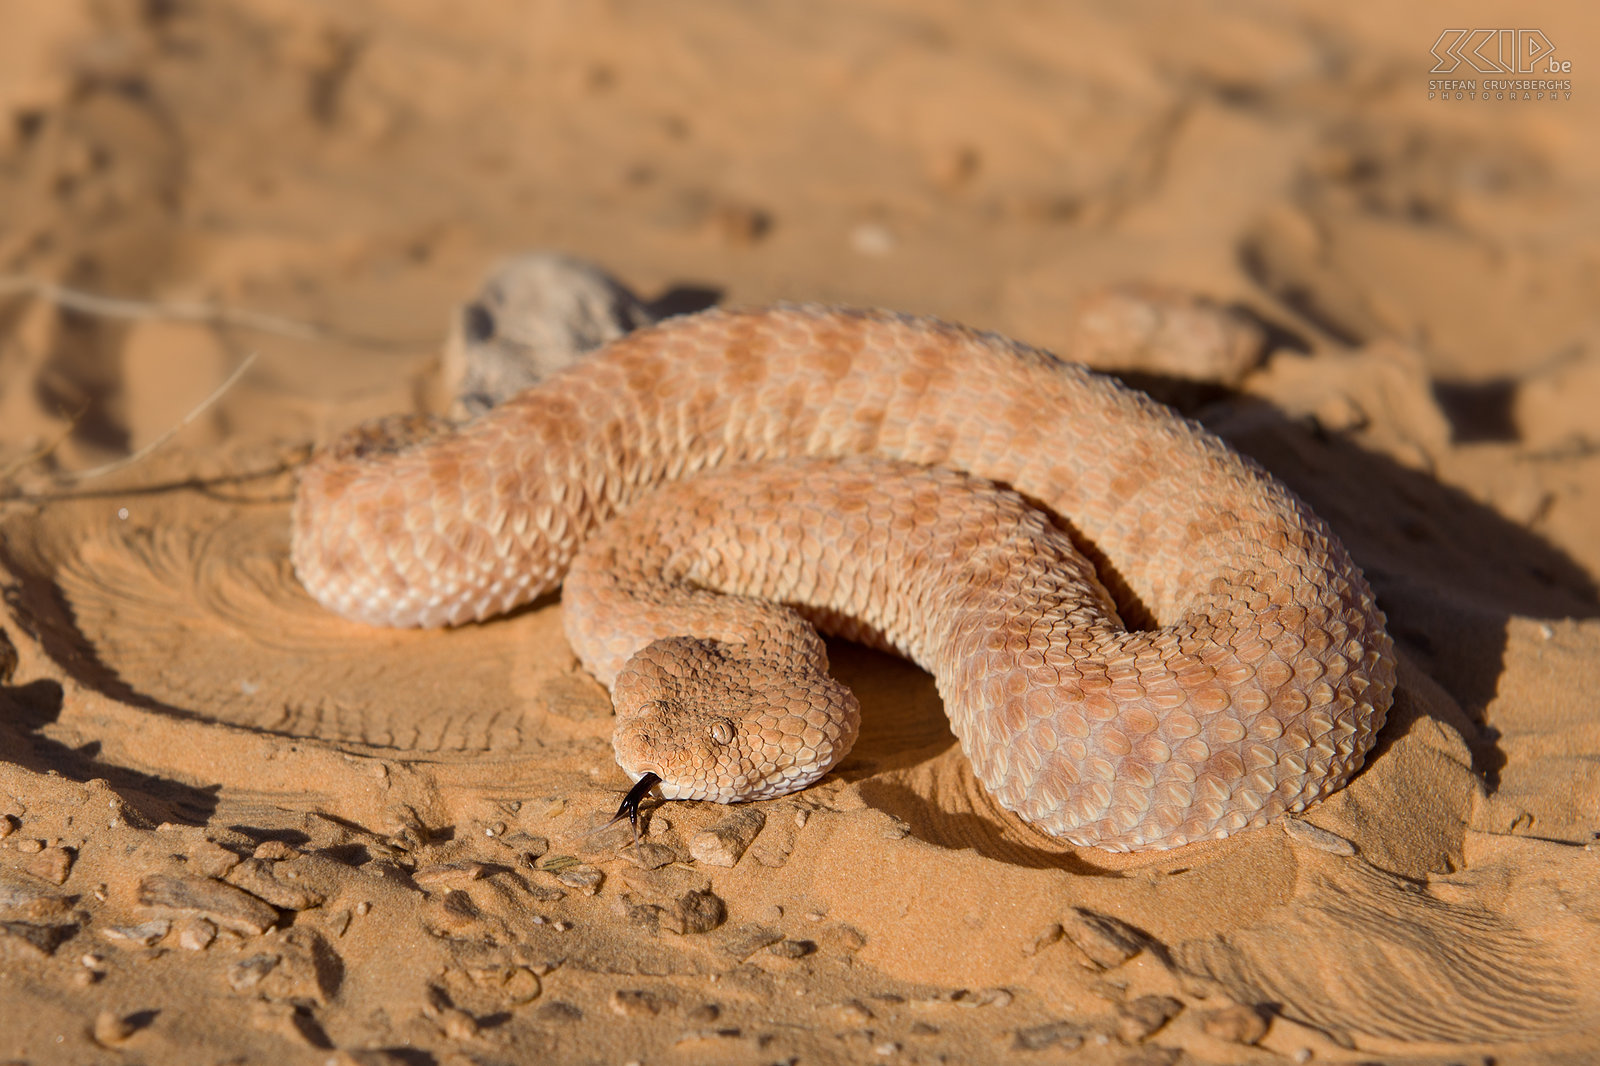 Sand viper This sand viper (Cerastes vipera) is a very venomous viper species typical for desert snakes in Northern Africa. Stefan Cruysberghs